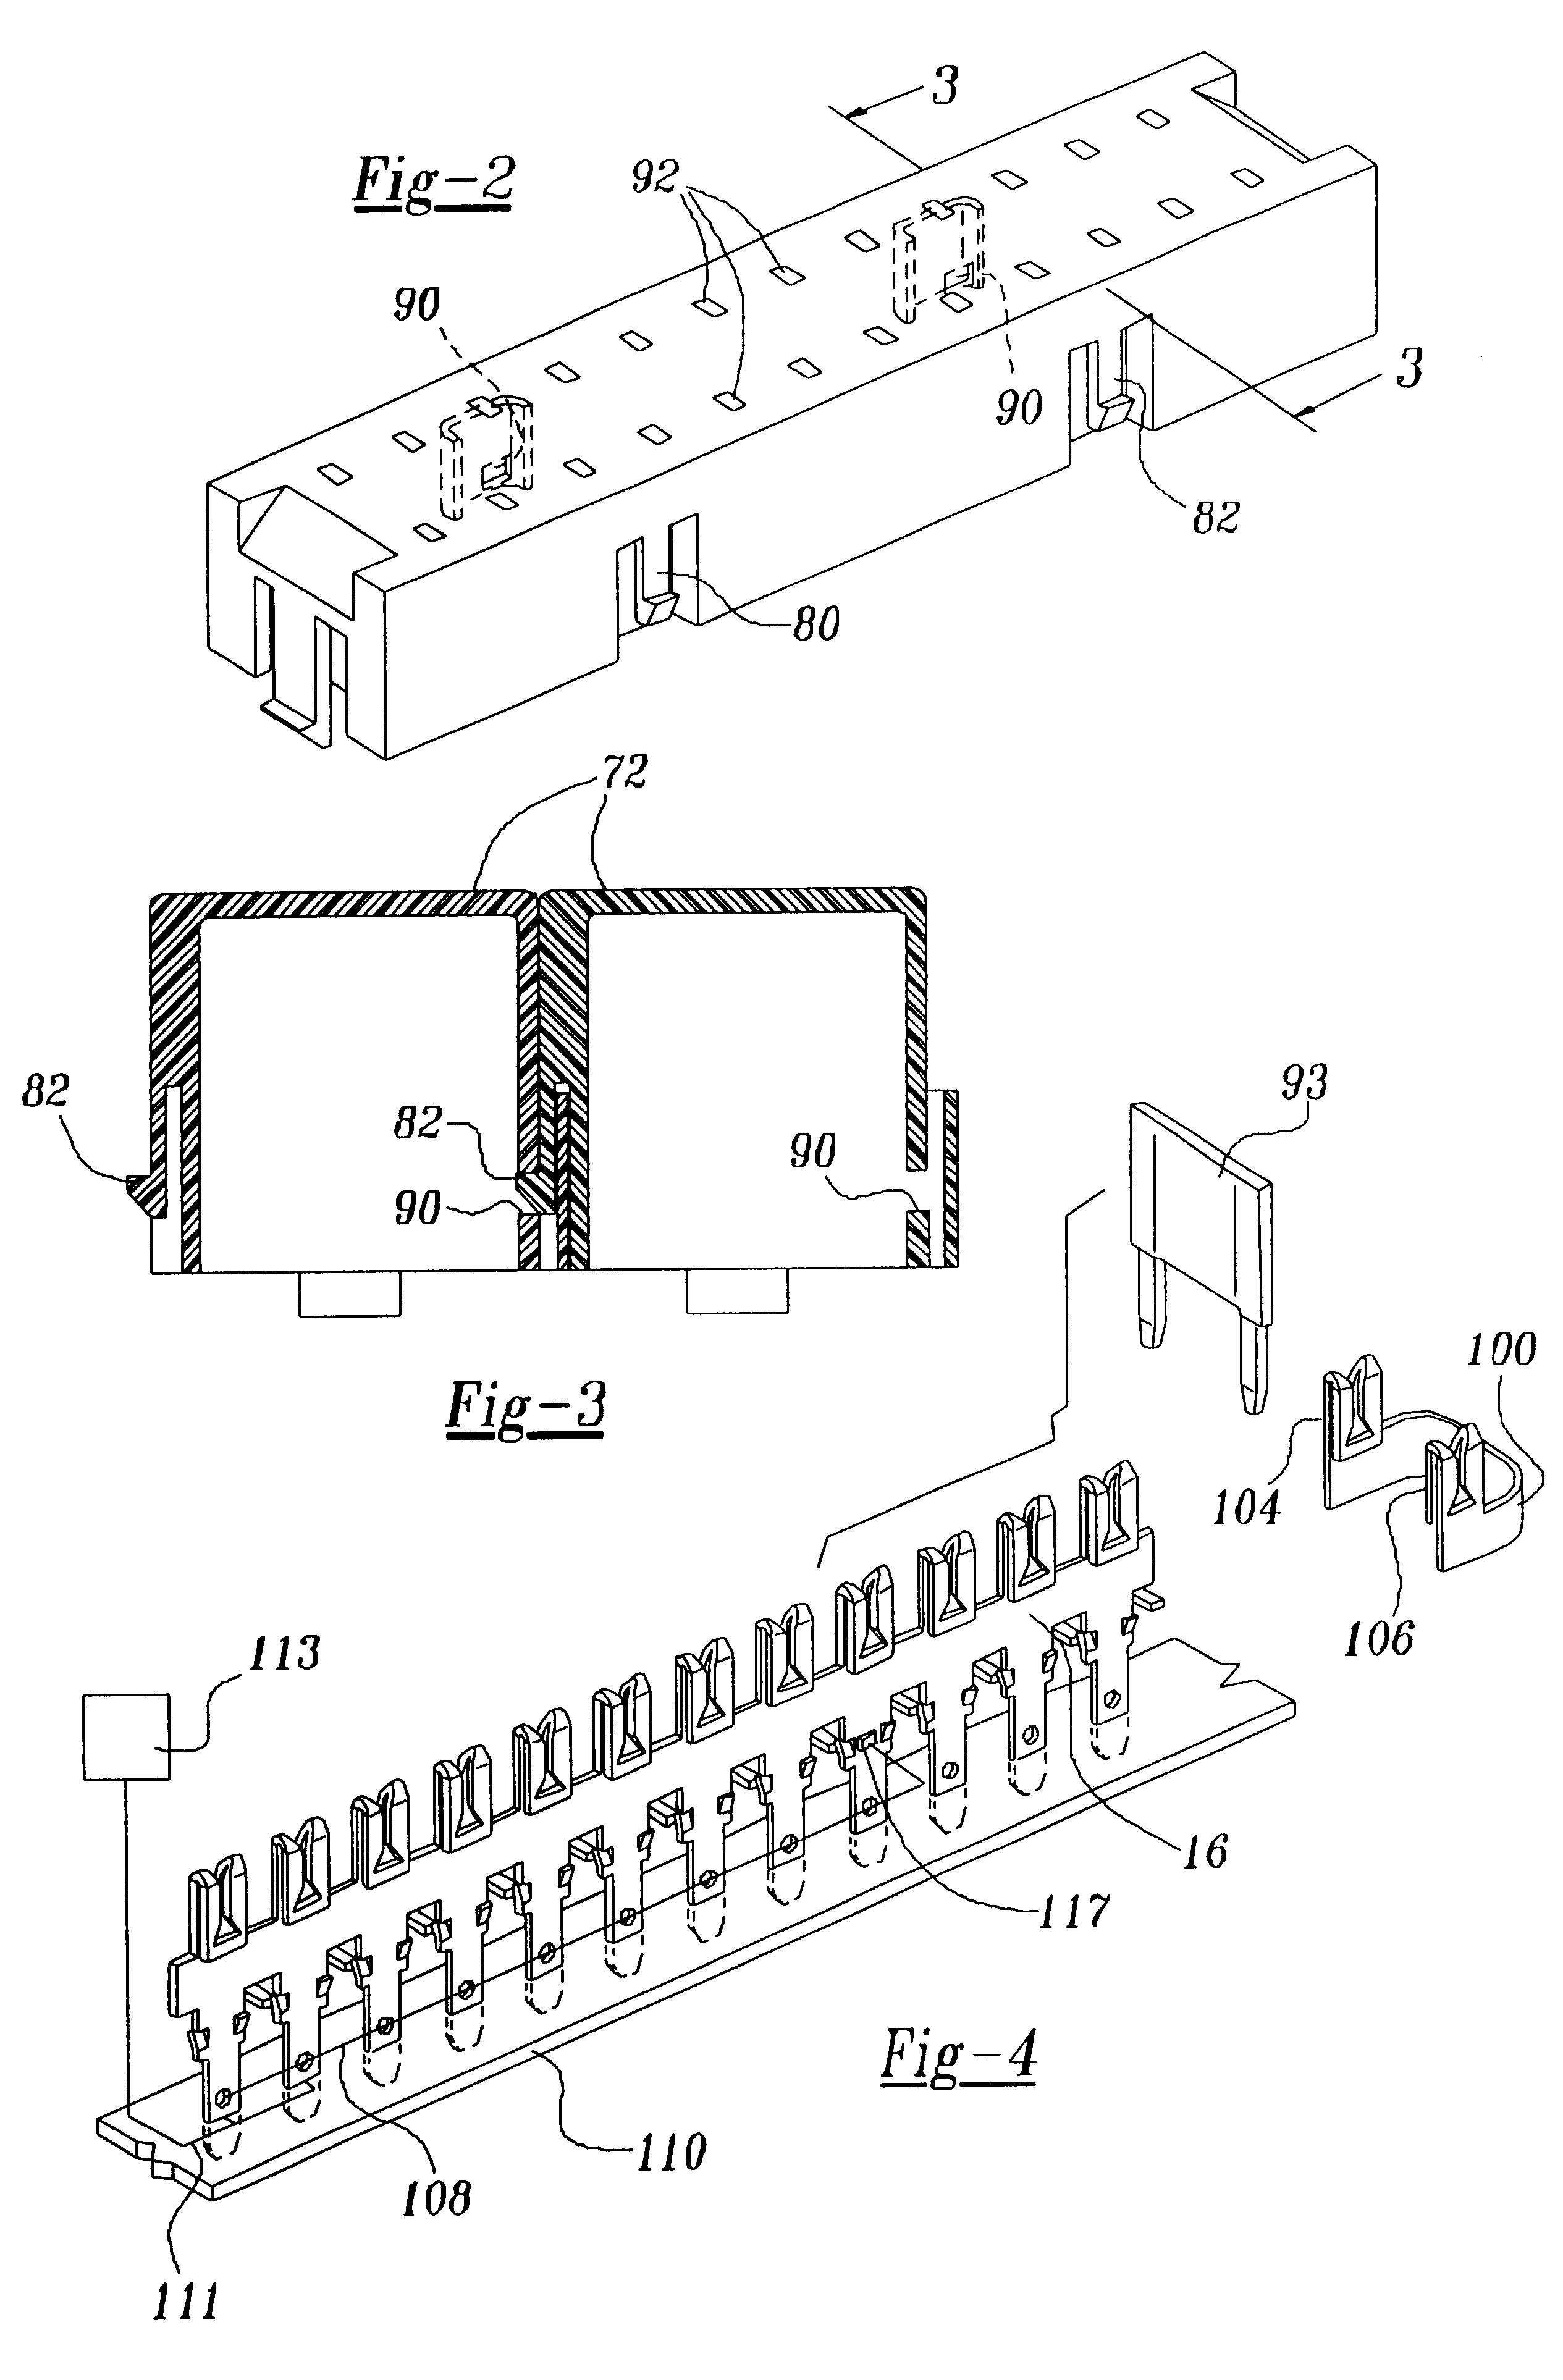 Method and apparatus for selectively connecting electrical circuits and components